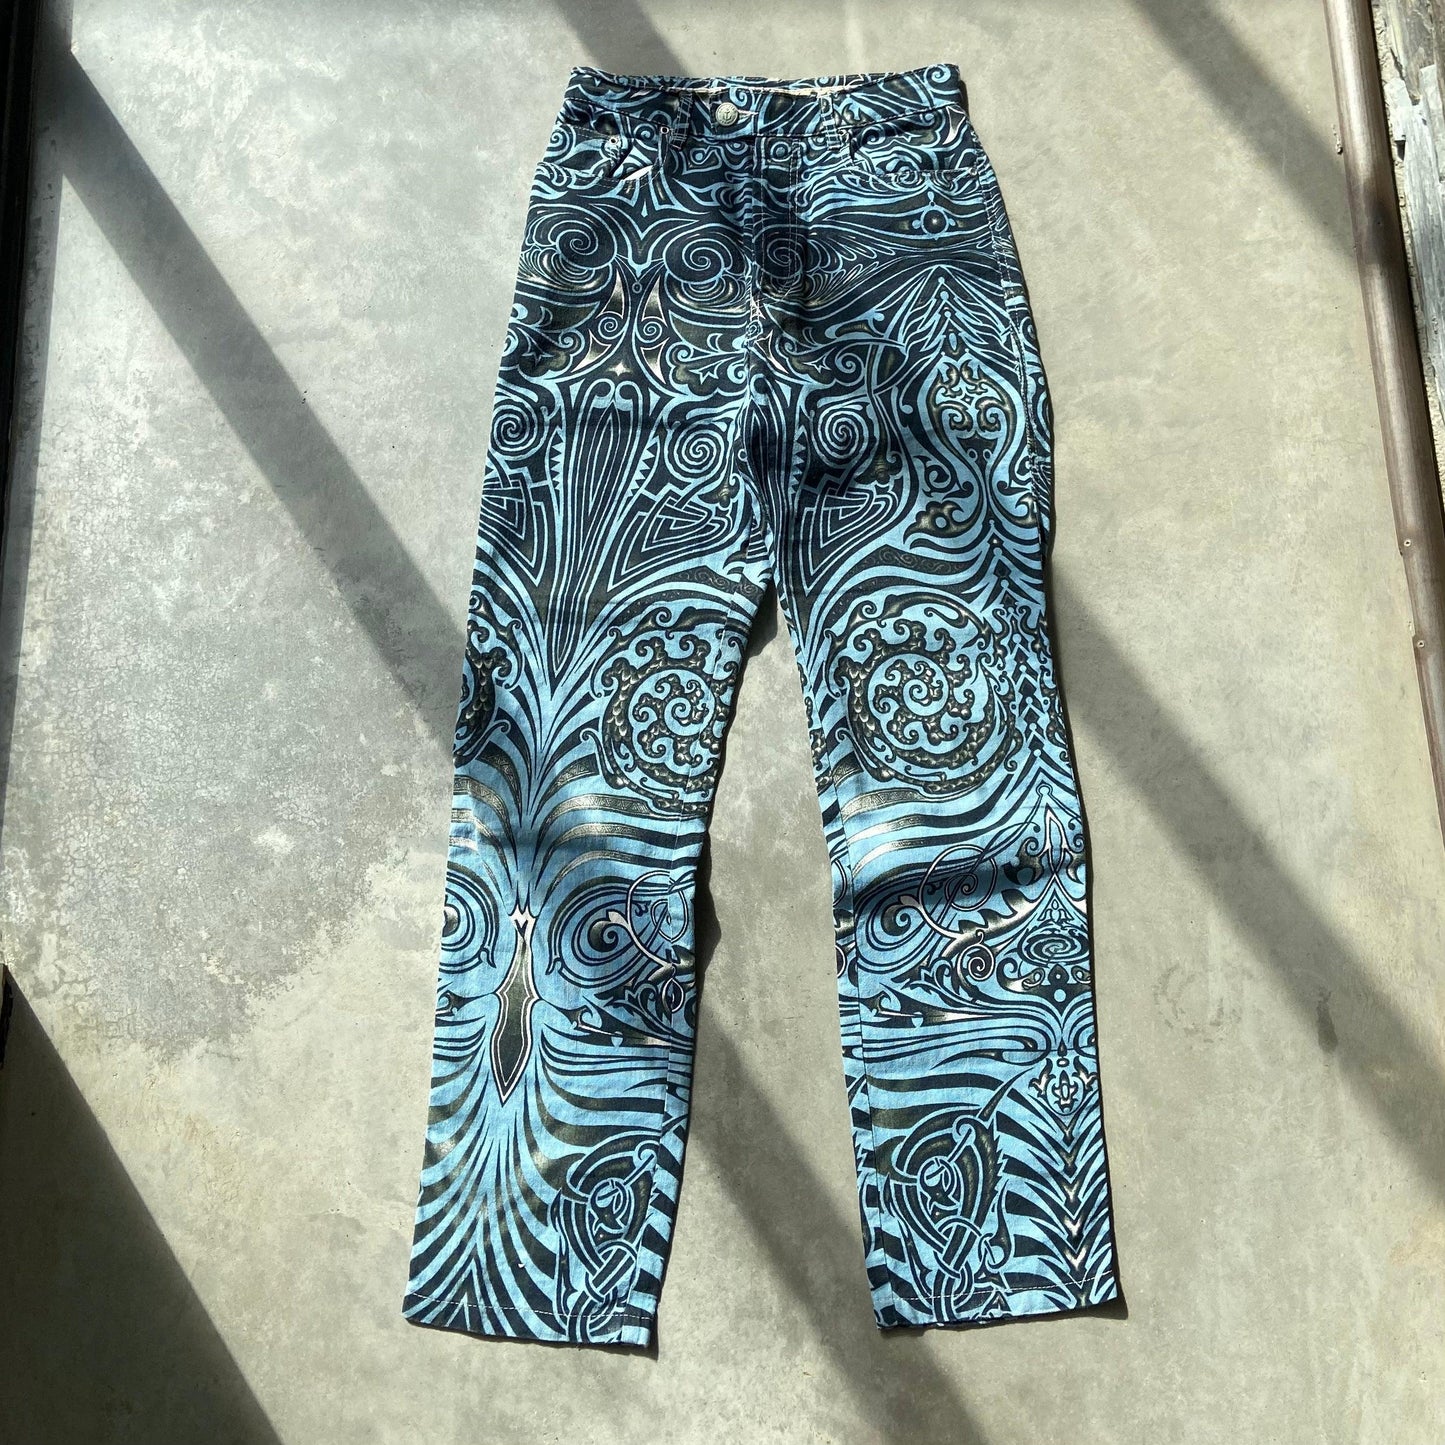 JEAN PAUL GAULTIER SS1996 TRIBAL PRINT TROUSERS - Known Source